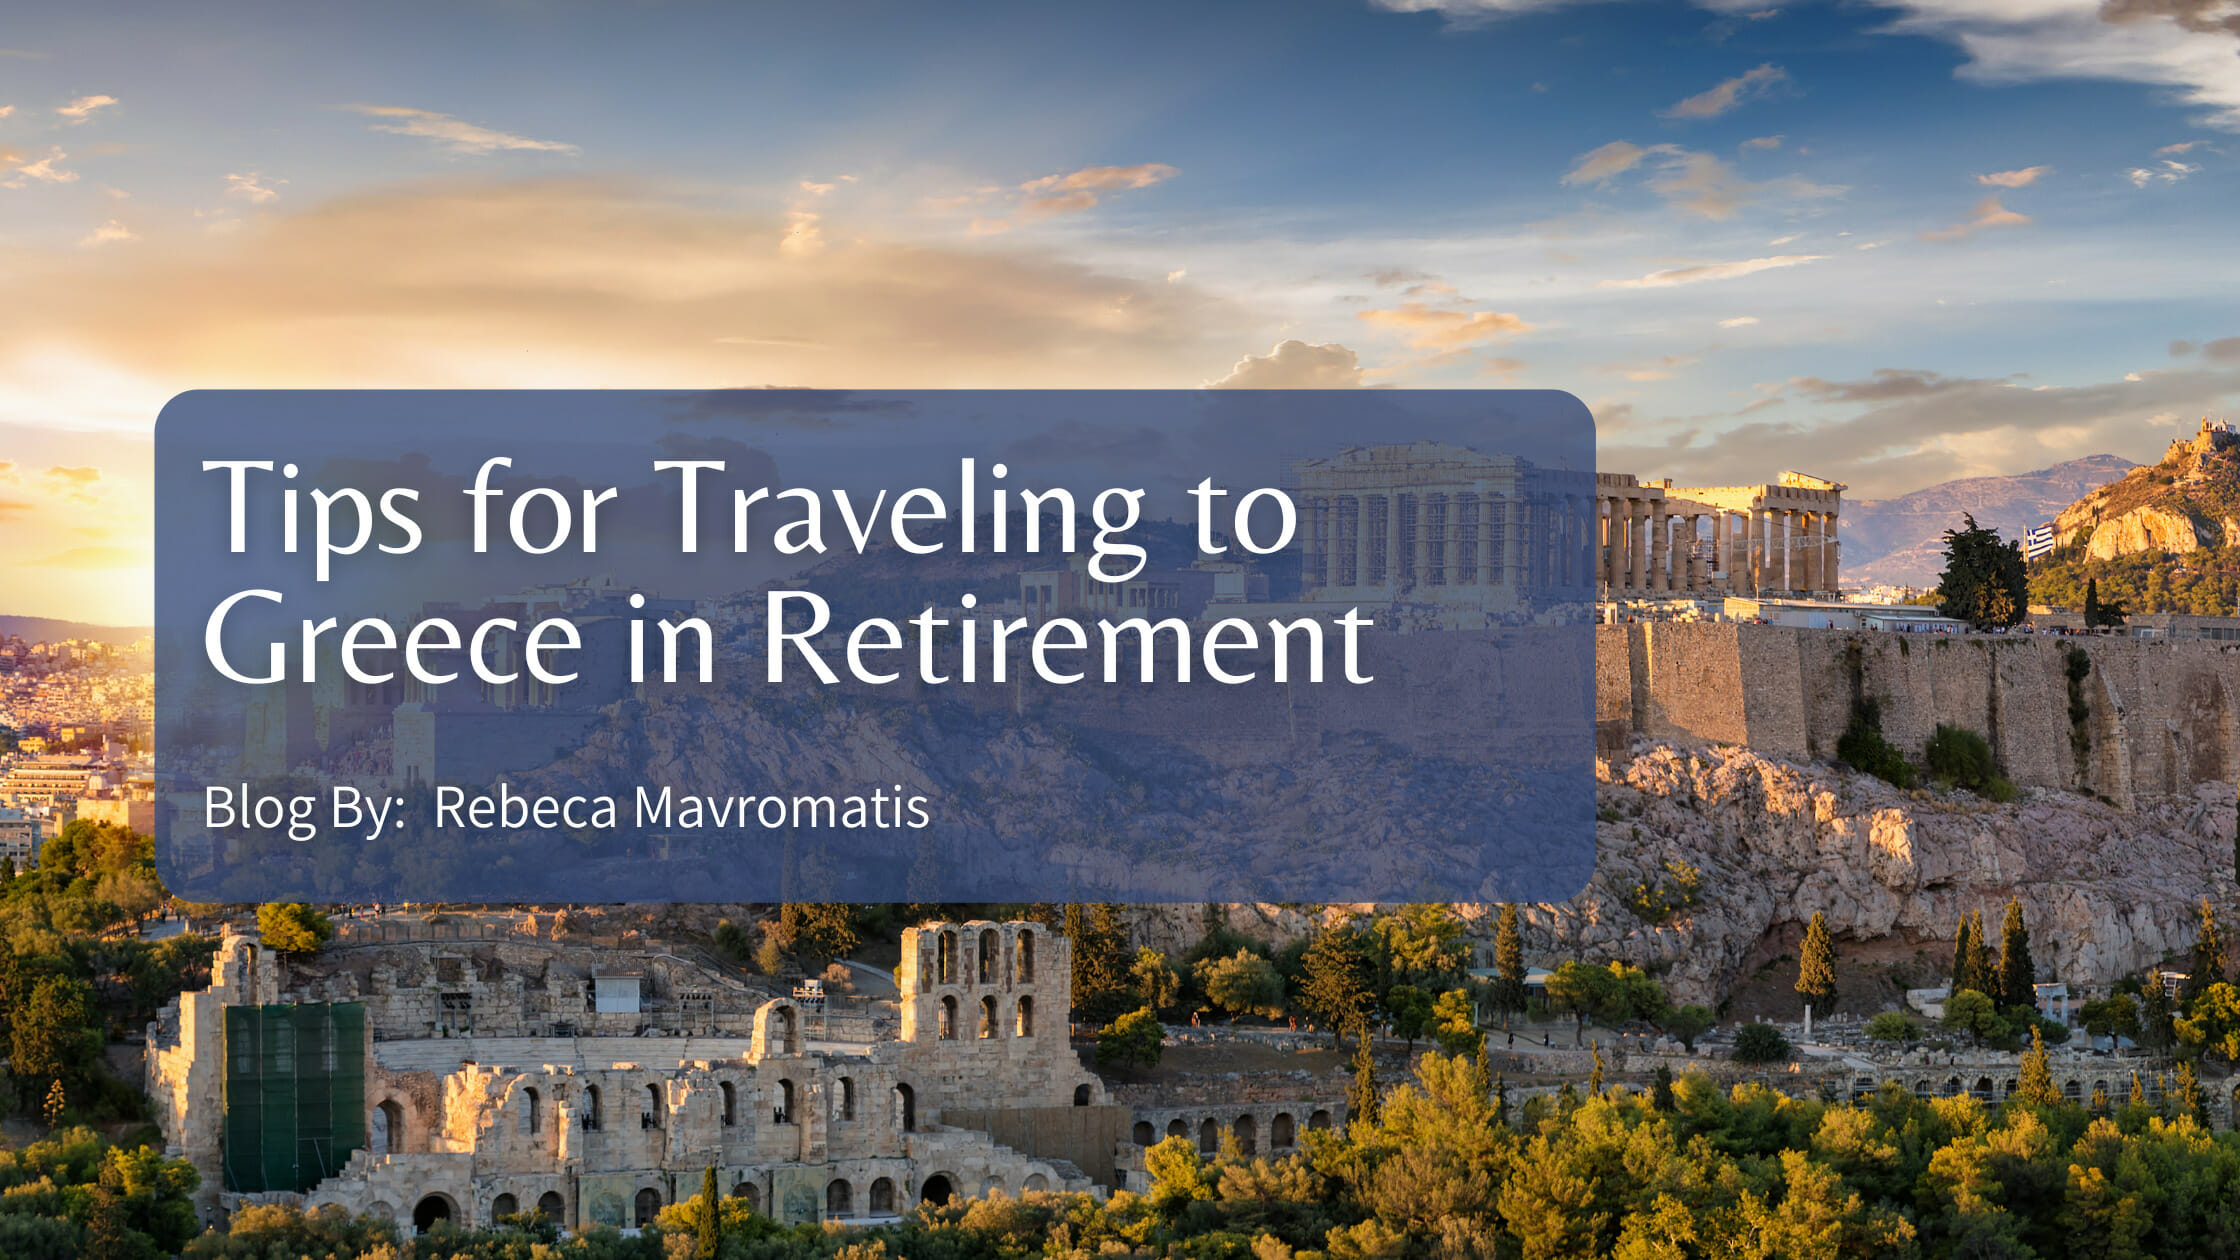 Tips for Traveling to Greece in Retirement